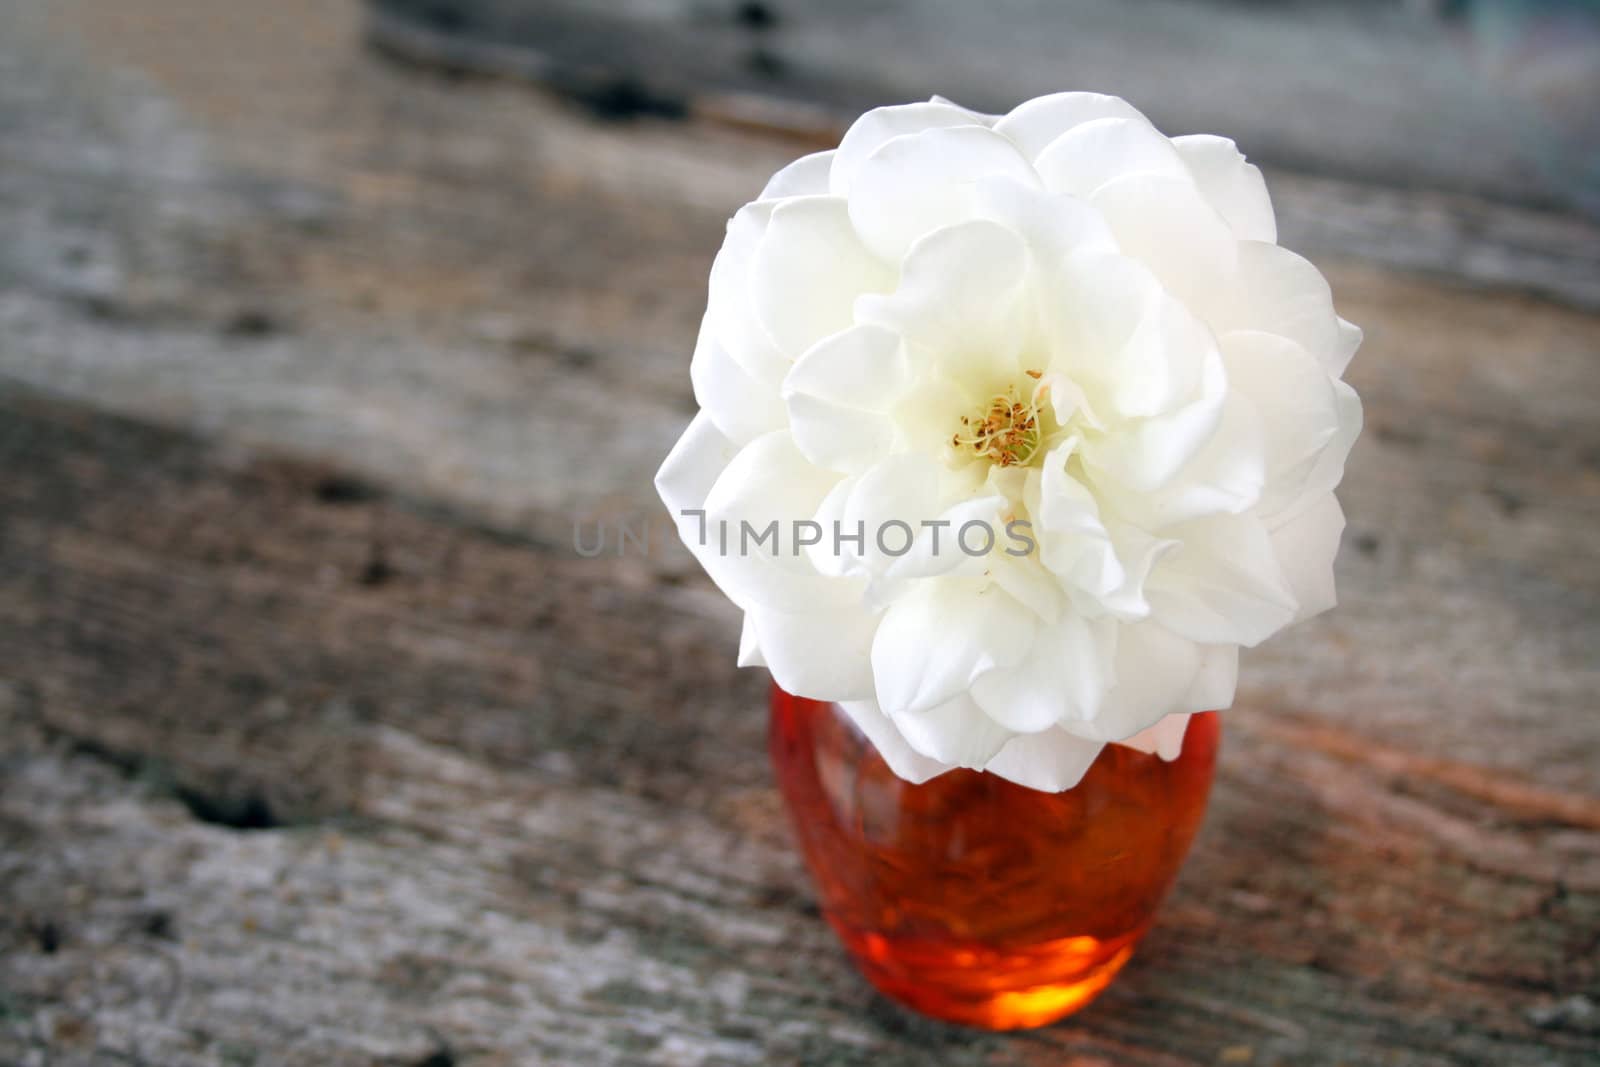 A white rose in an orange vase with a wood textured background.